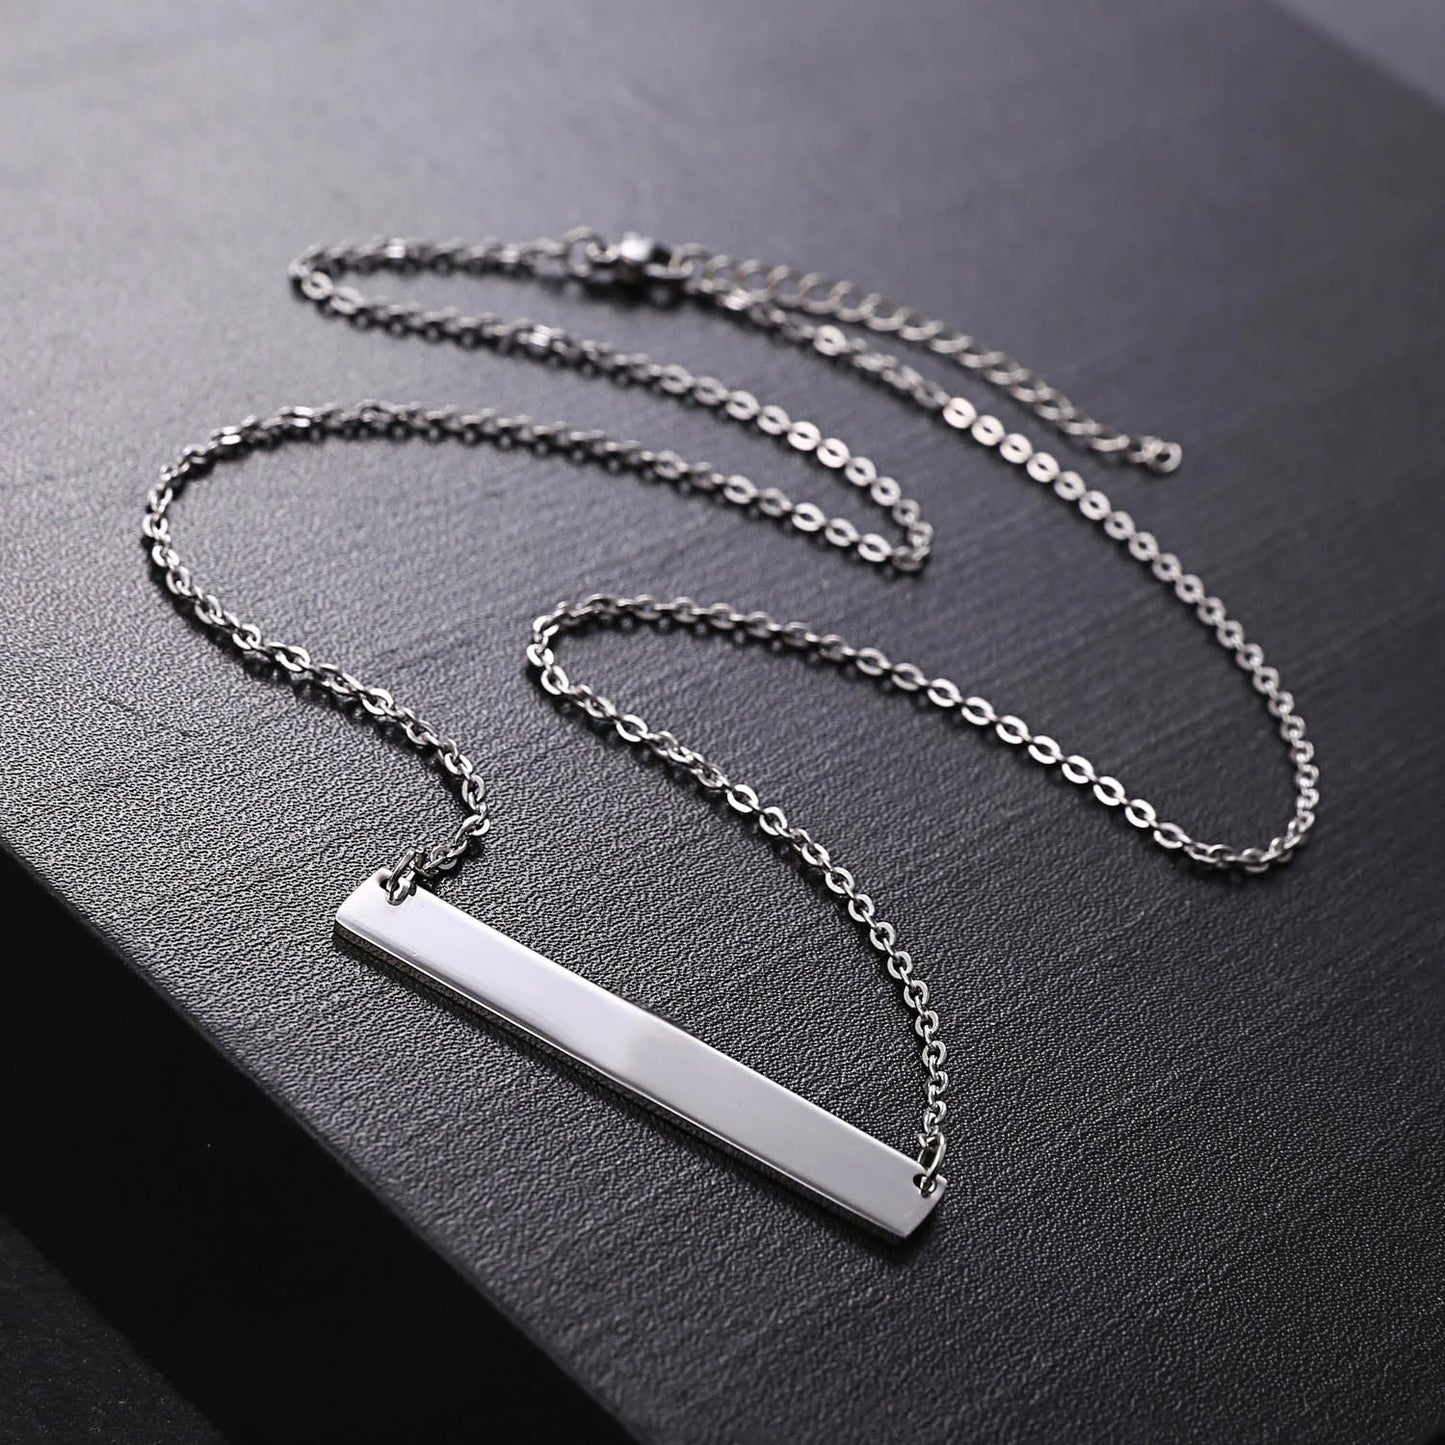 Engraved Bar Necklace Custom Coordinate Name Date Square Pendant Necklace Women Men Personalized Stainless Steel Jewelry Gifts